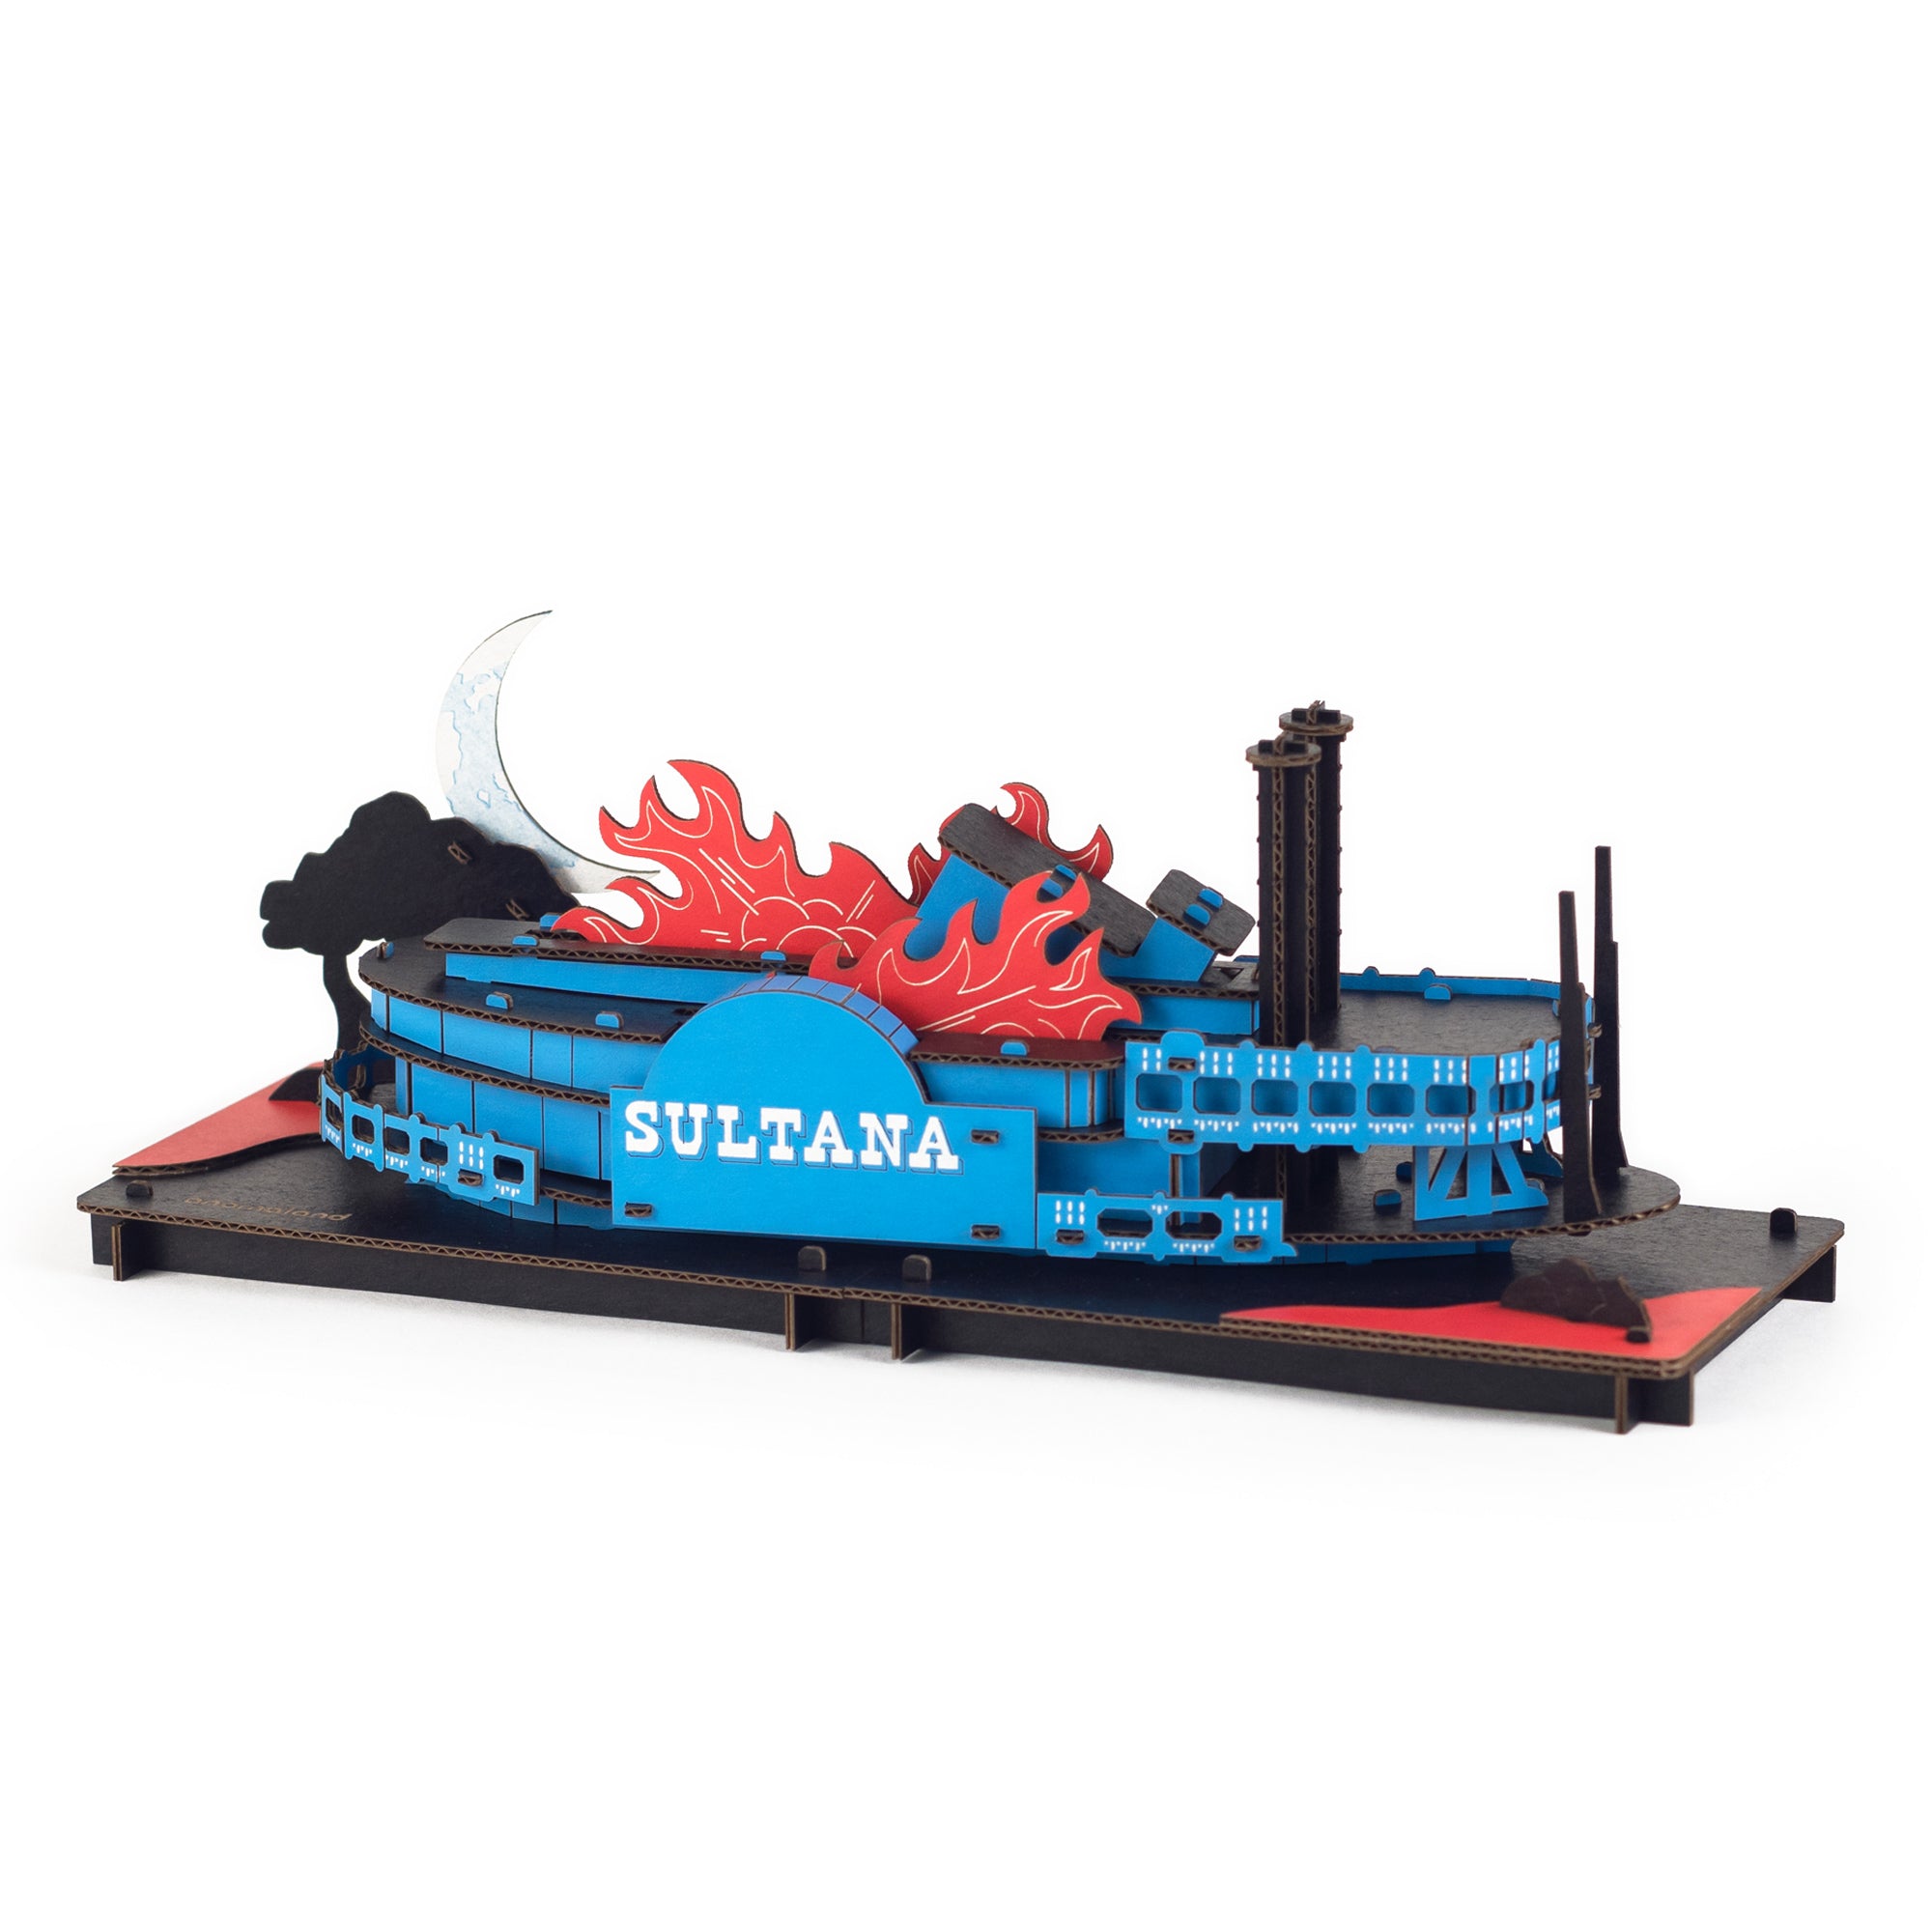 Anomaland Sultana Cardboard Model Kit shows the crescent moon behind the Sultana in flames